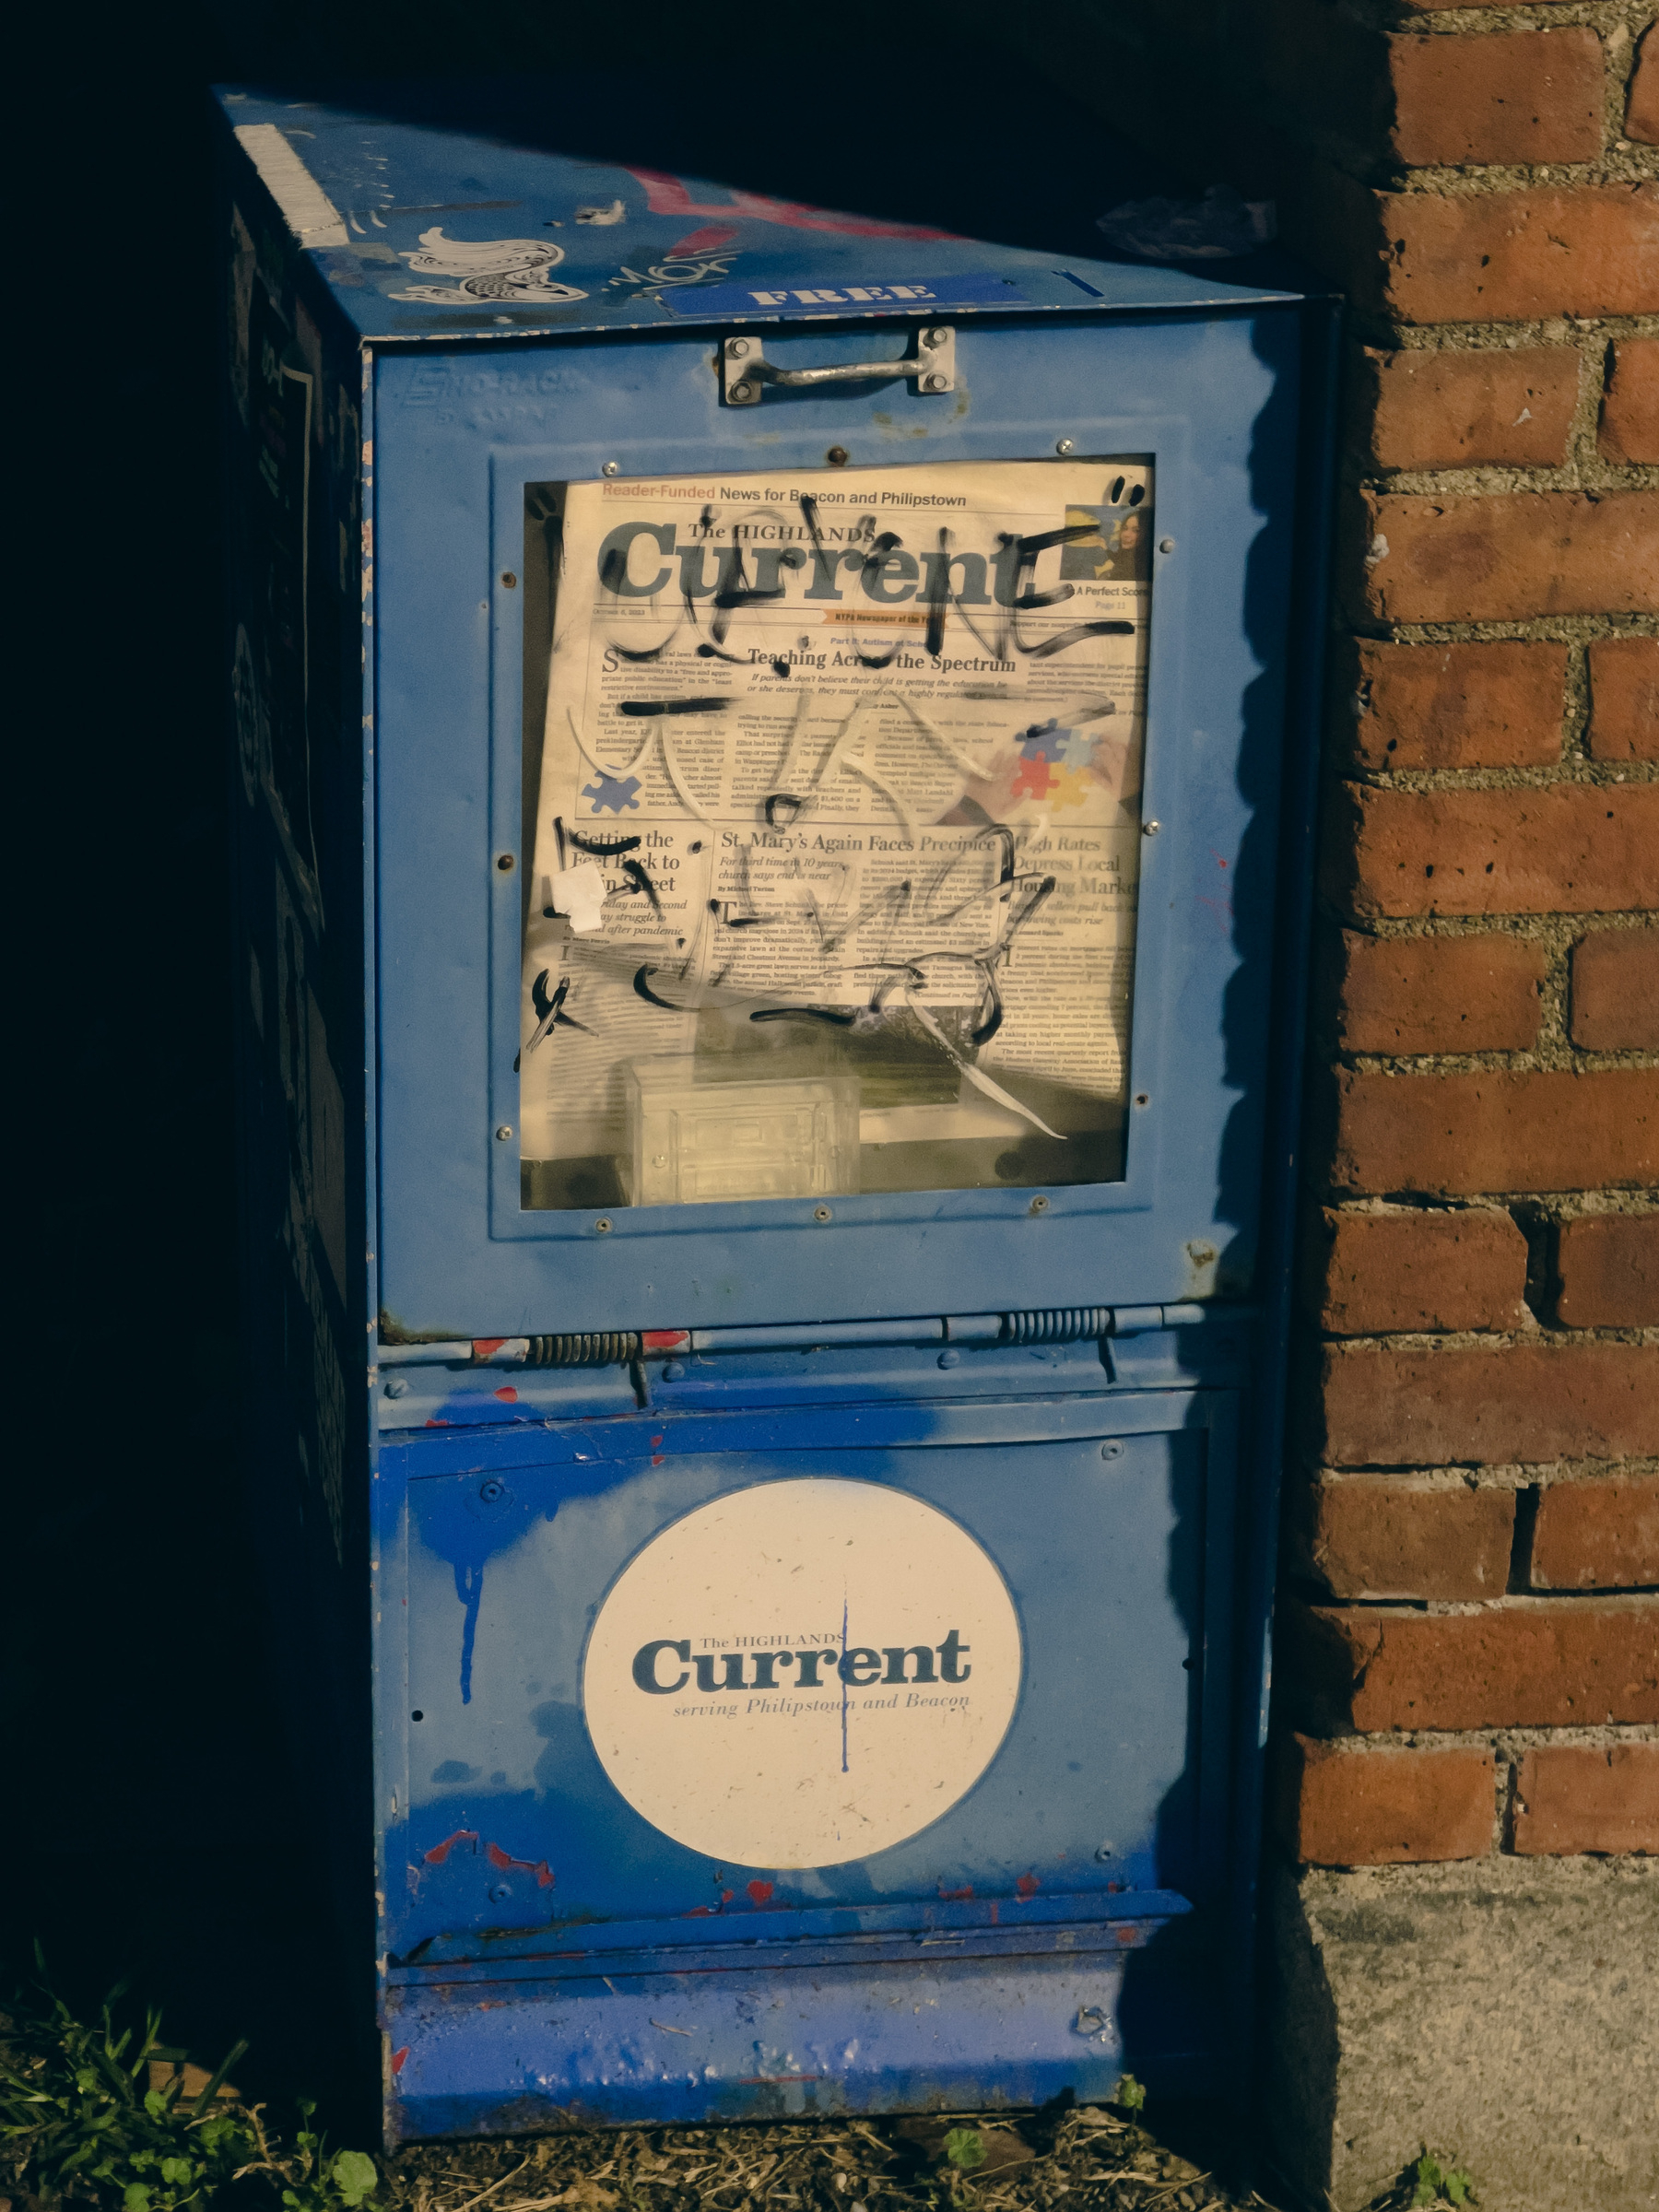 Blue newspaper dispenser box with Highland Current logo and papers.